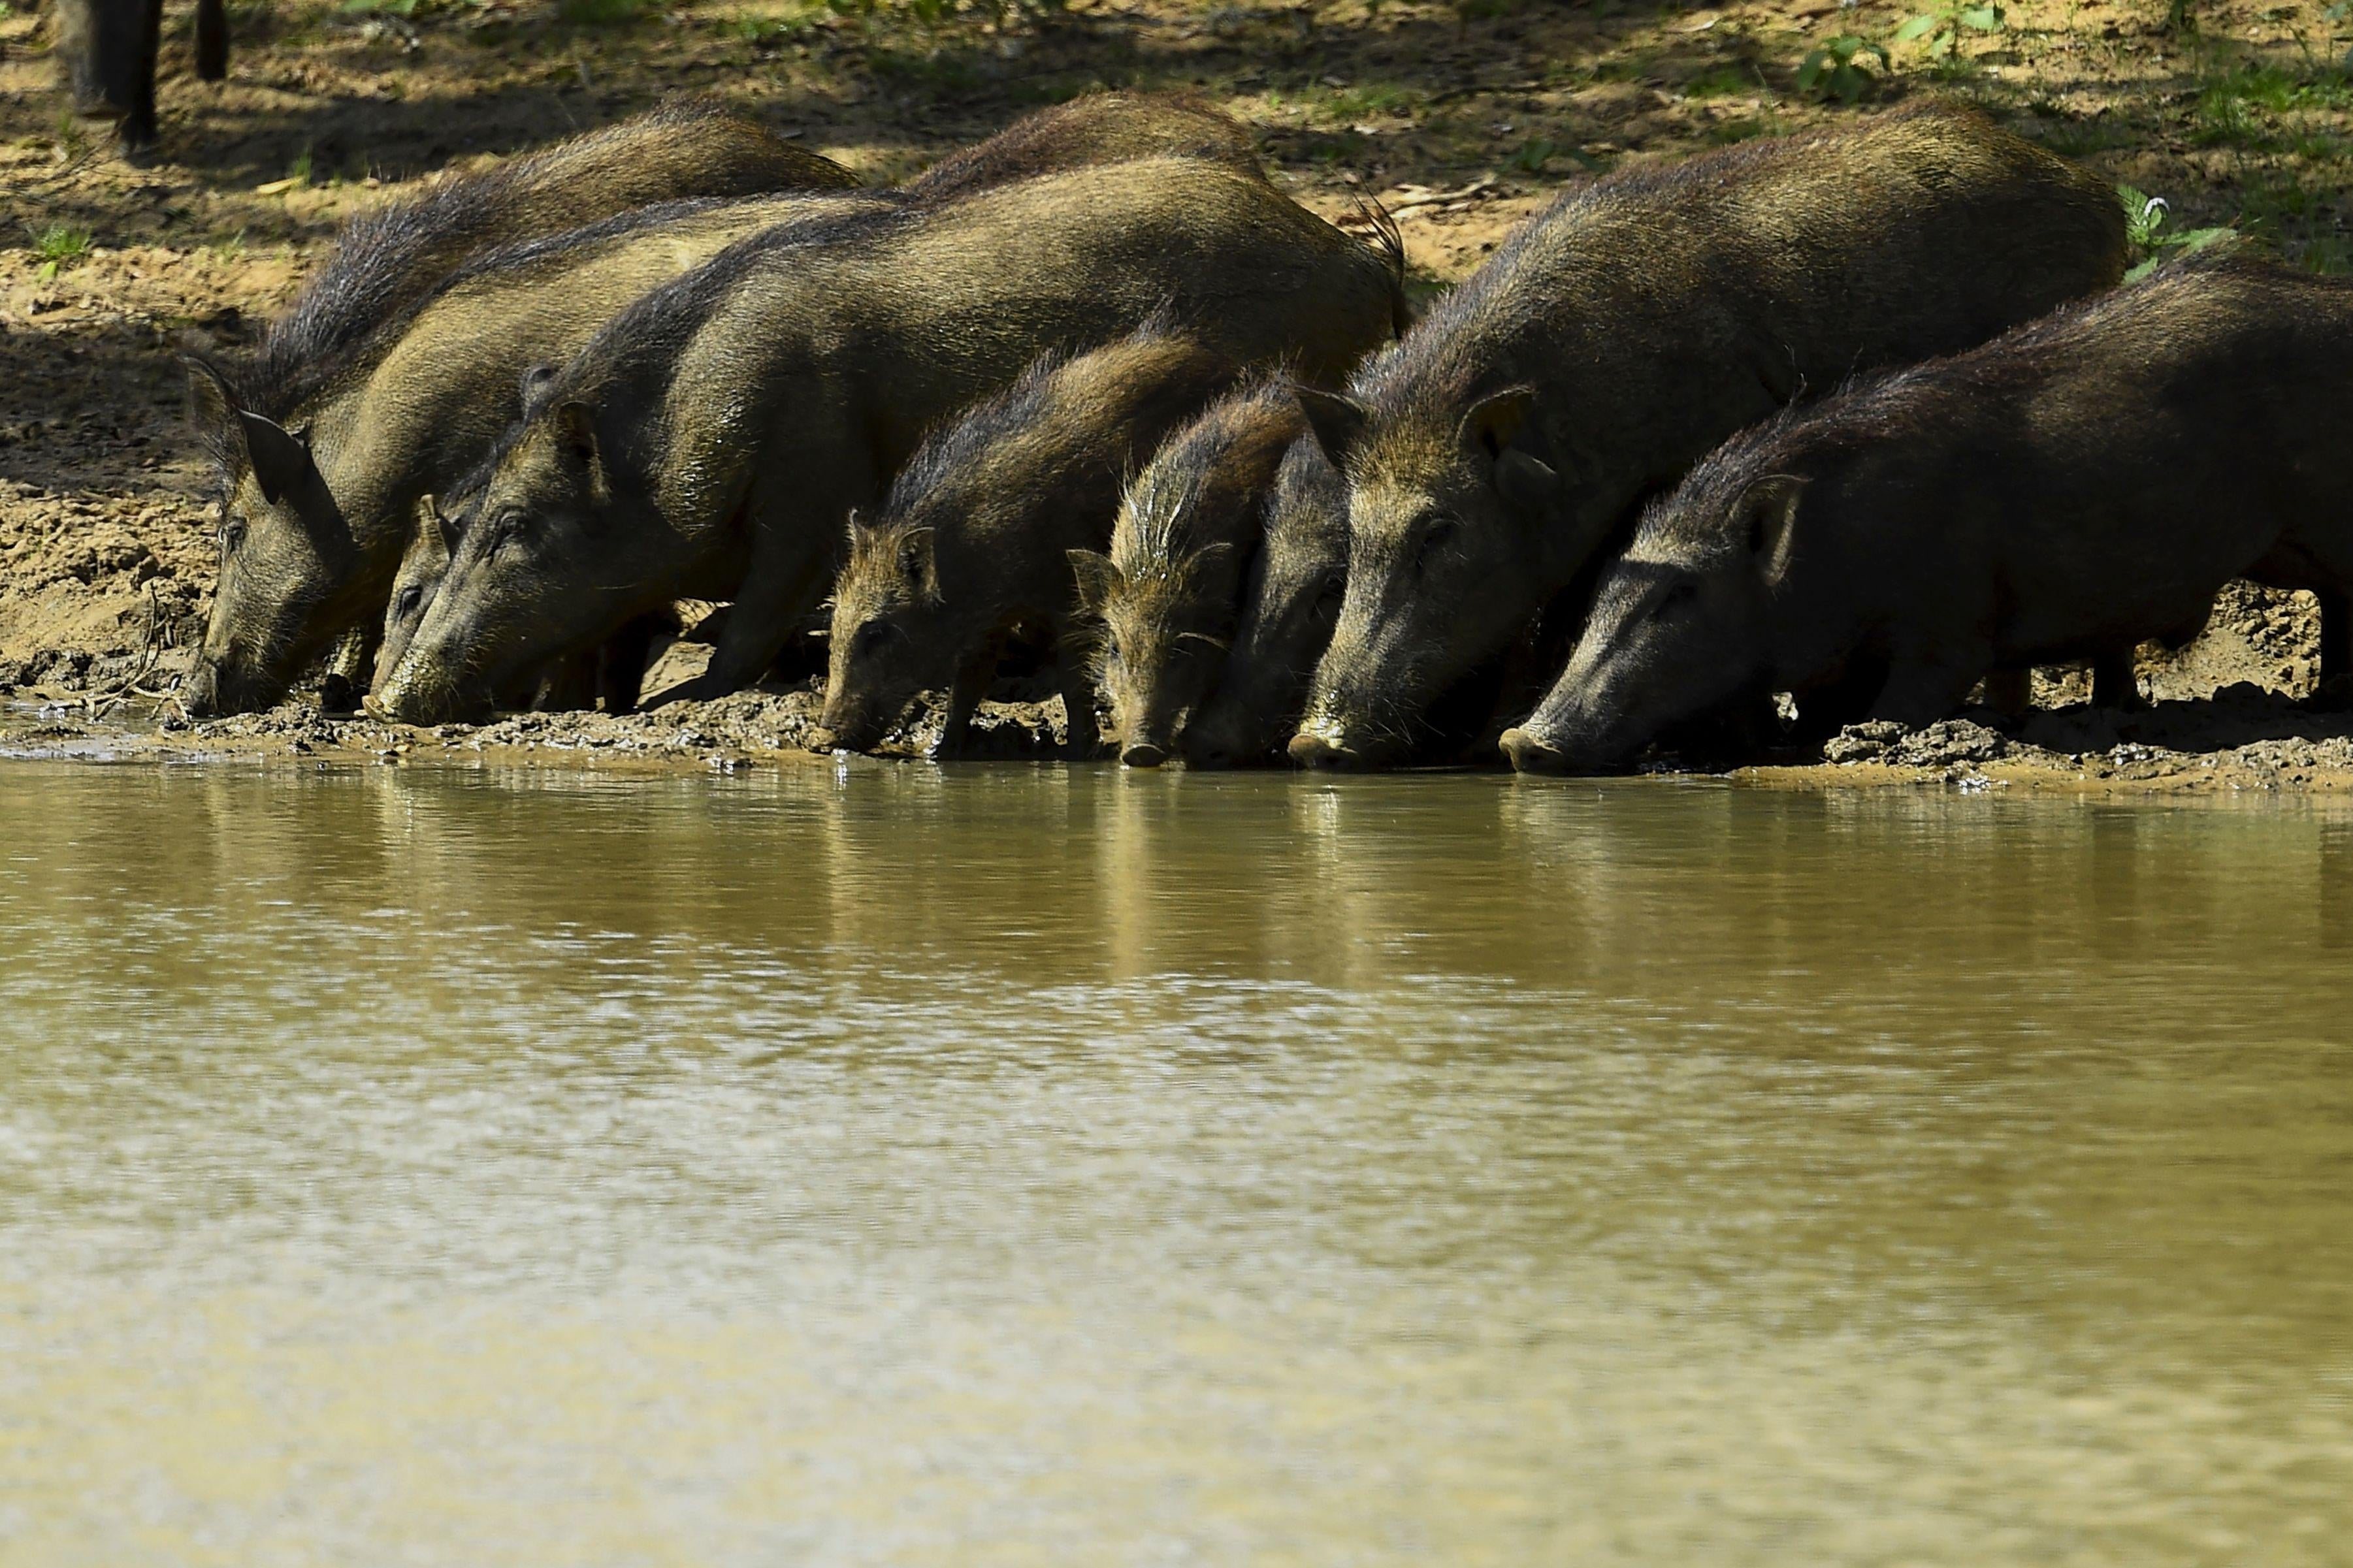 A group of boars drink from a river.